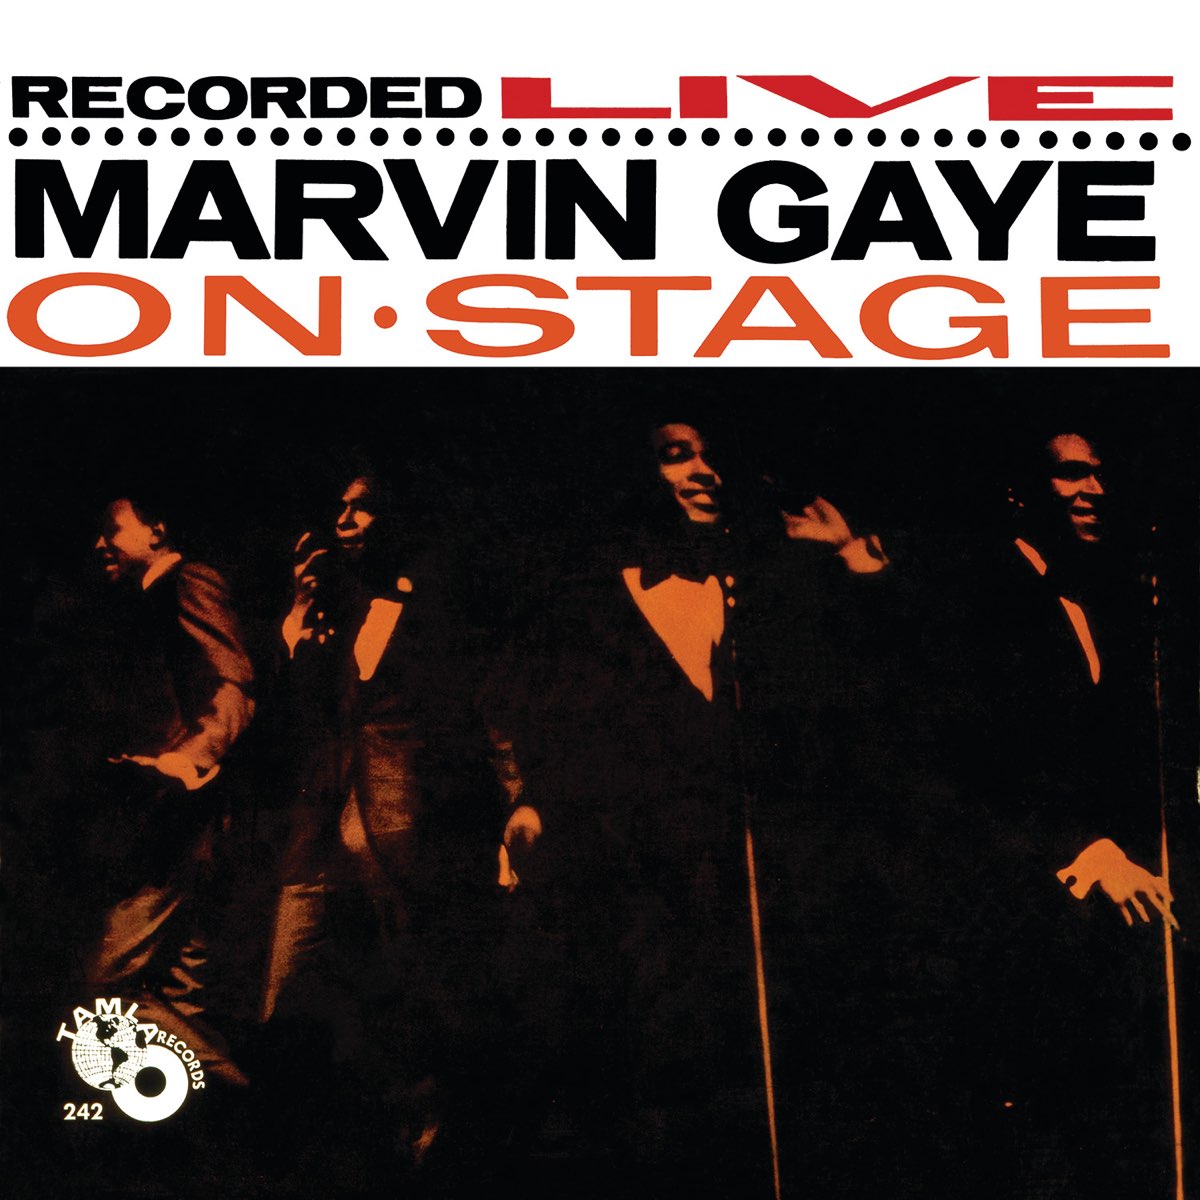 Recorded Live: Marvin Gaye On Stage - マービン・ゲイのアルバム 